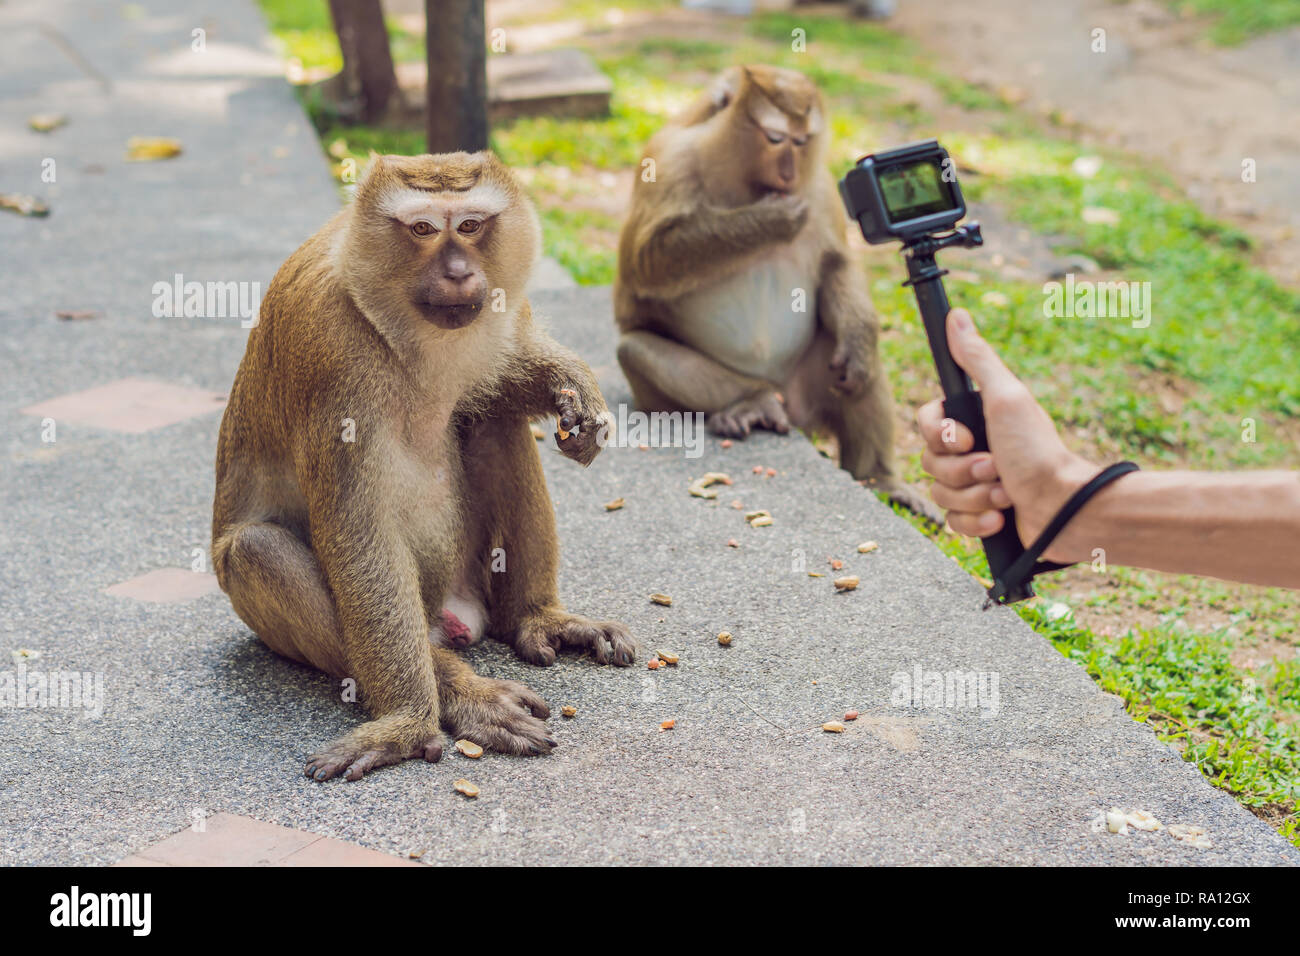 A man takes a picture of a monkey on an action camera Stock Photo - Alamy